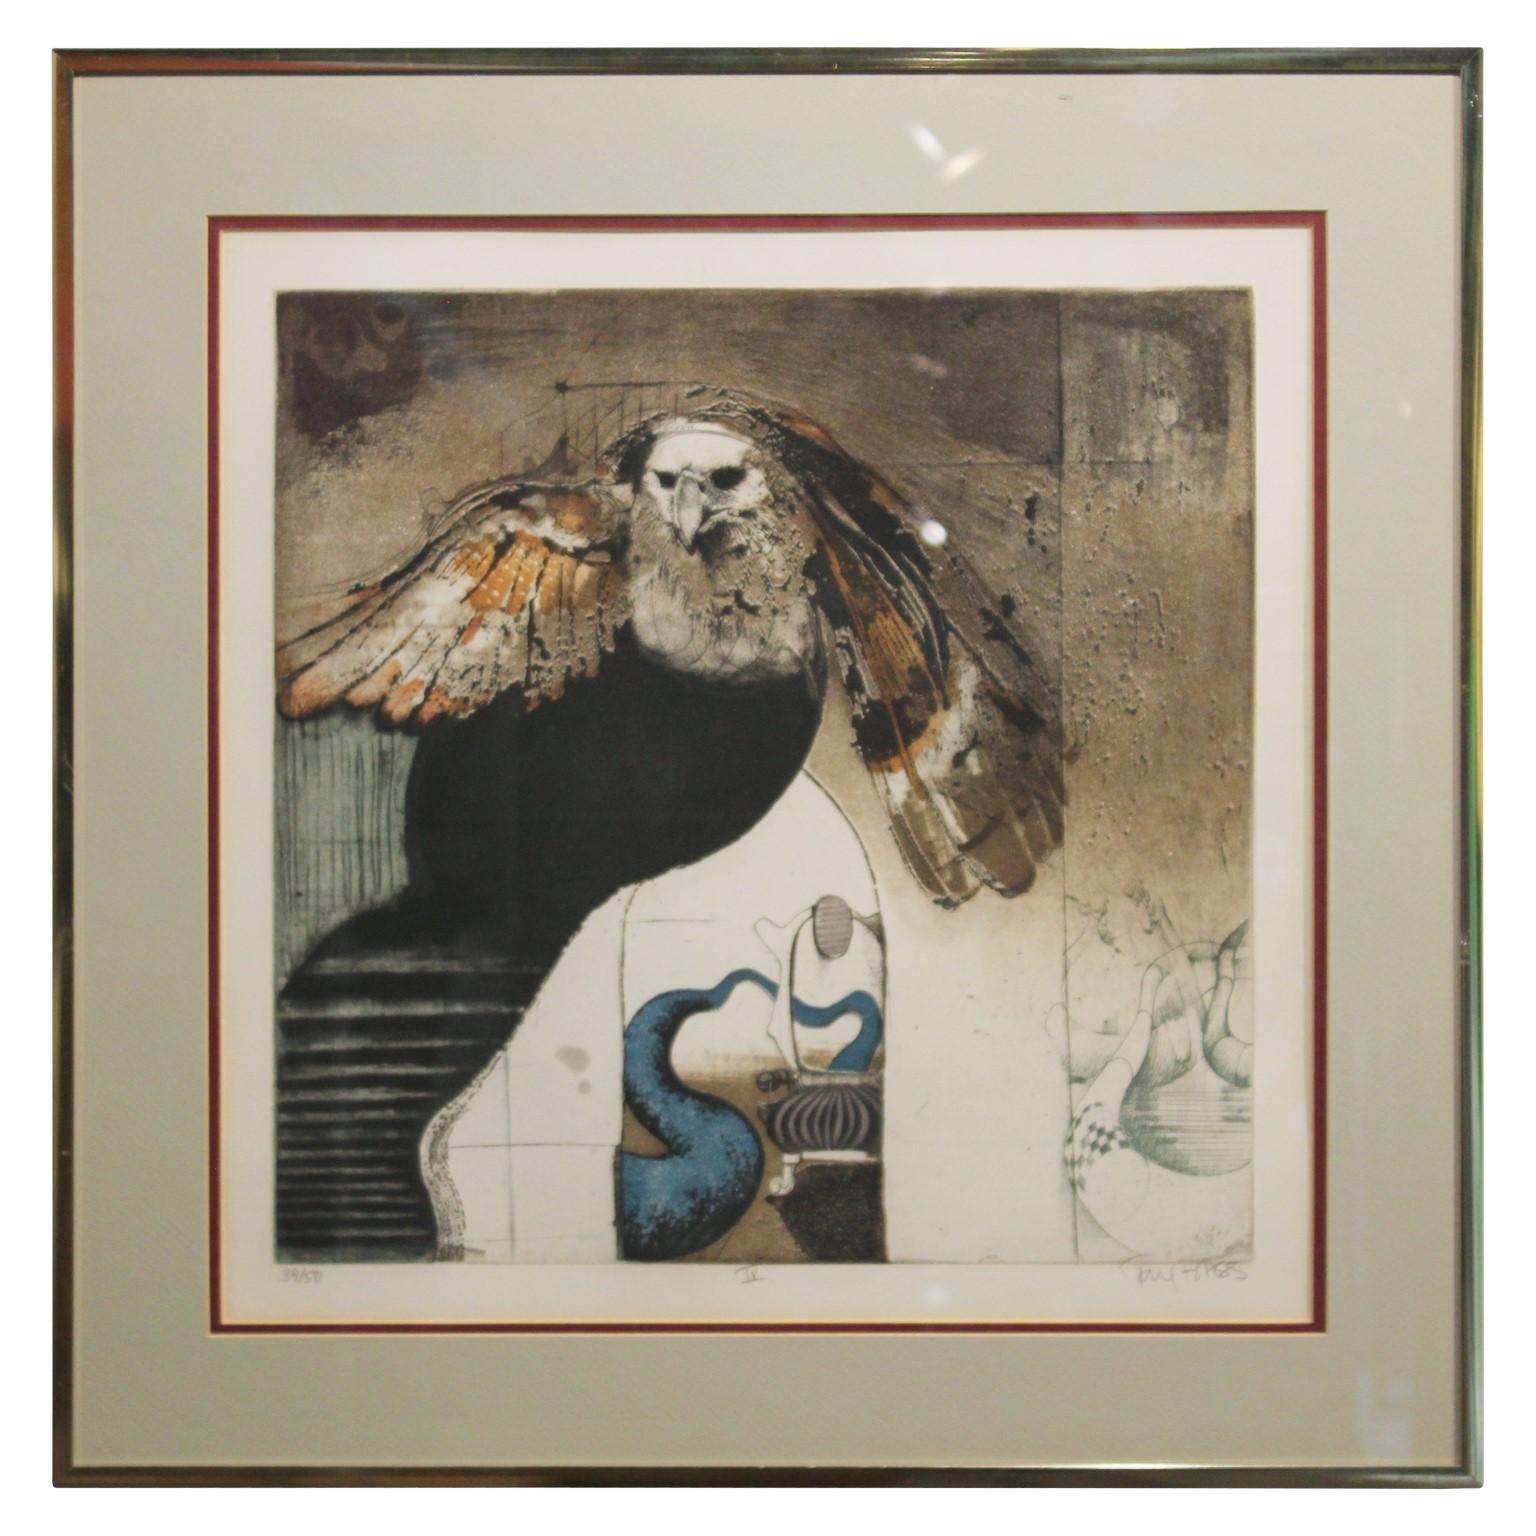 Tony Bass Animal Print - "IV" Contemporary Figurative Owl Lithograph, Edition 39 of 50 